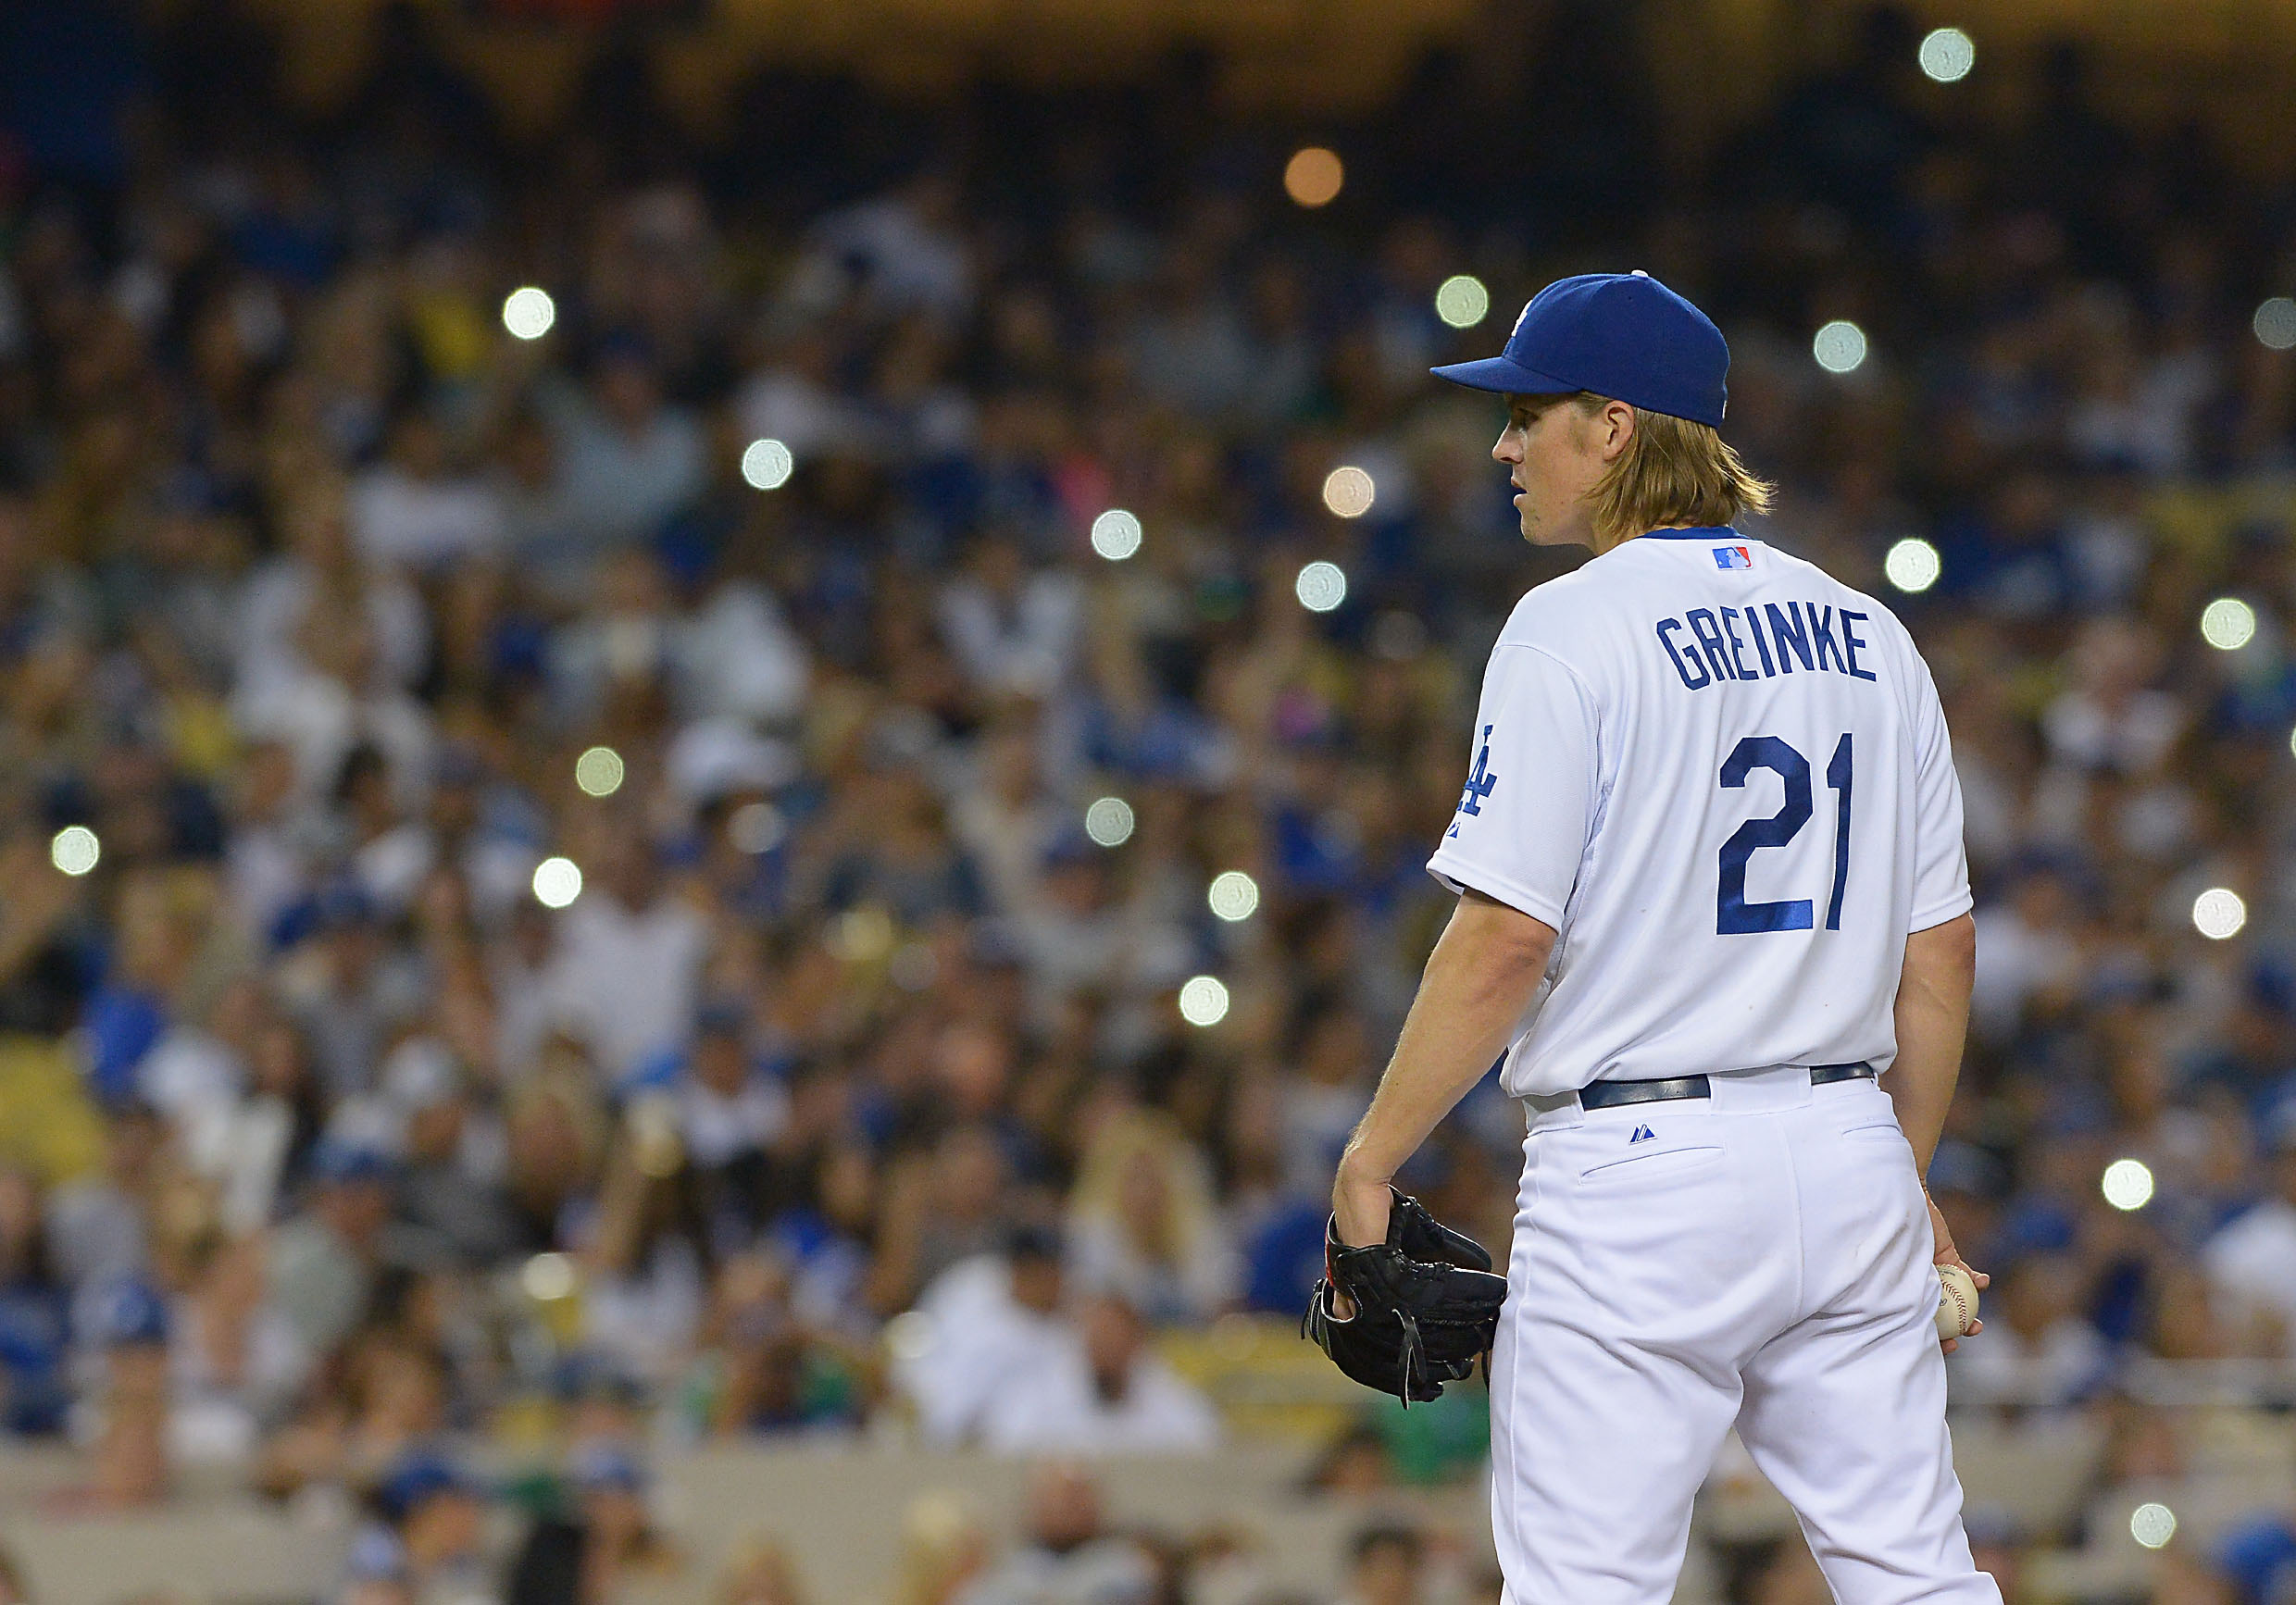 Does Zack Greinke's incessant study indicate that his ERA isn't quite a fluke?